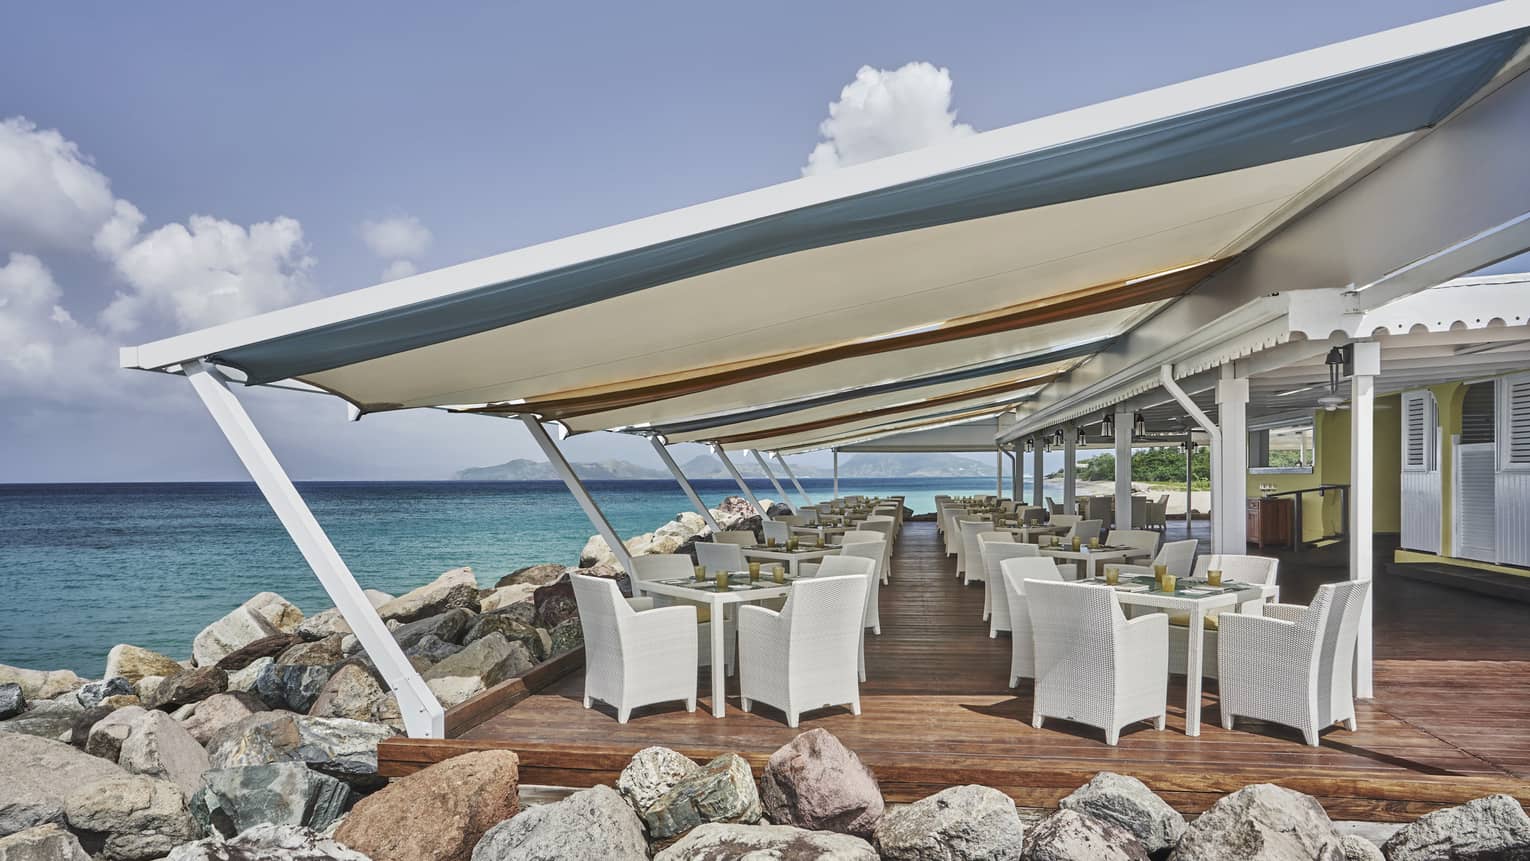 Outdoor restaurant covered by large awning, set next to large rocks and the sea